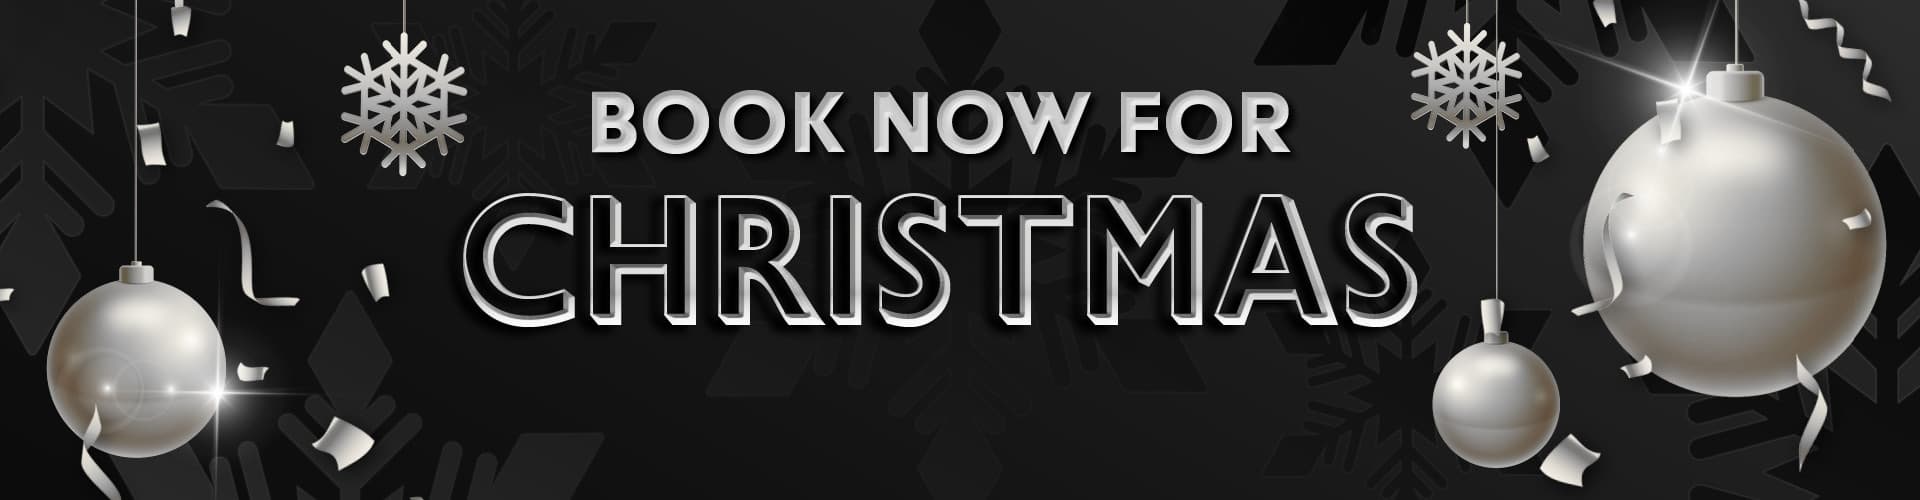 Book Now for Christmas at The Loft